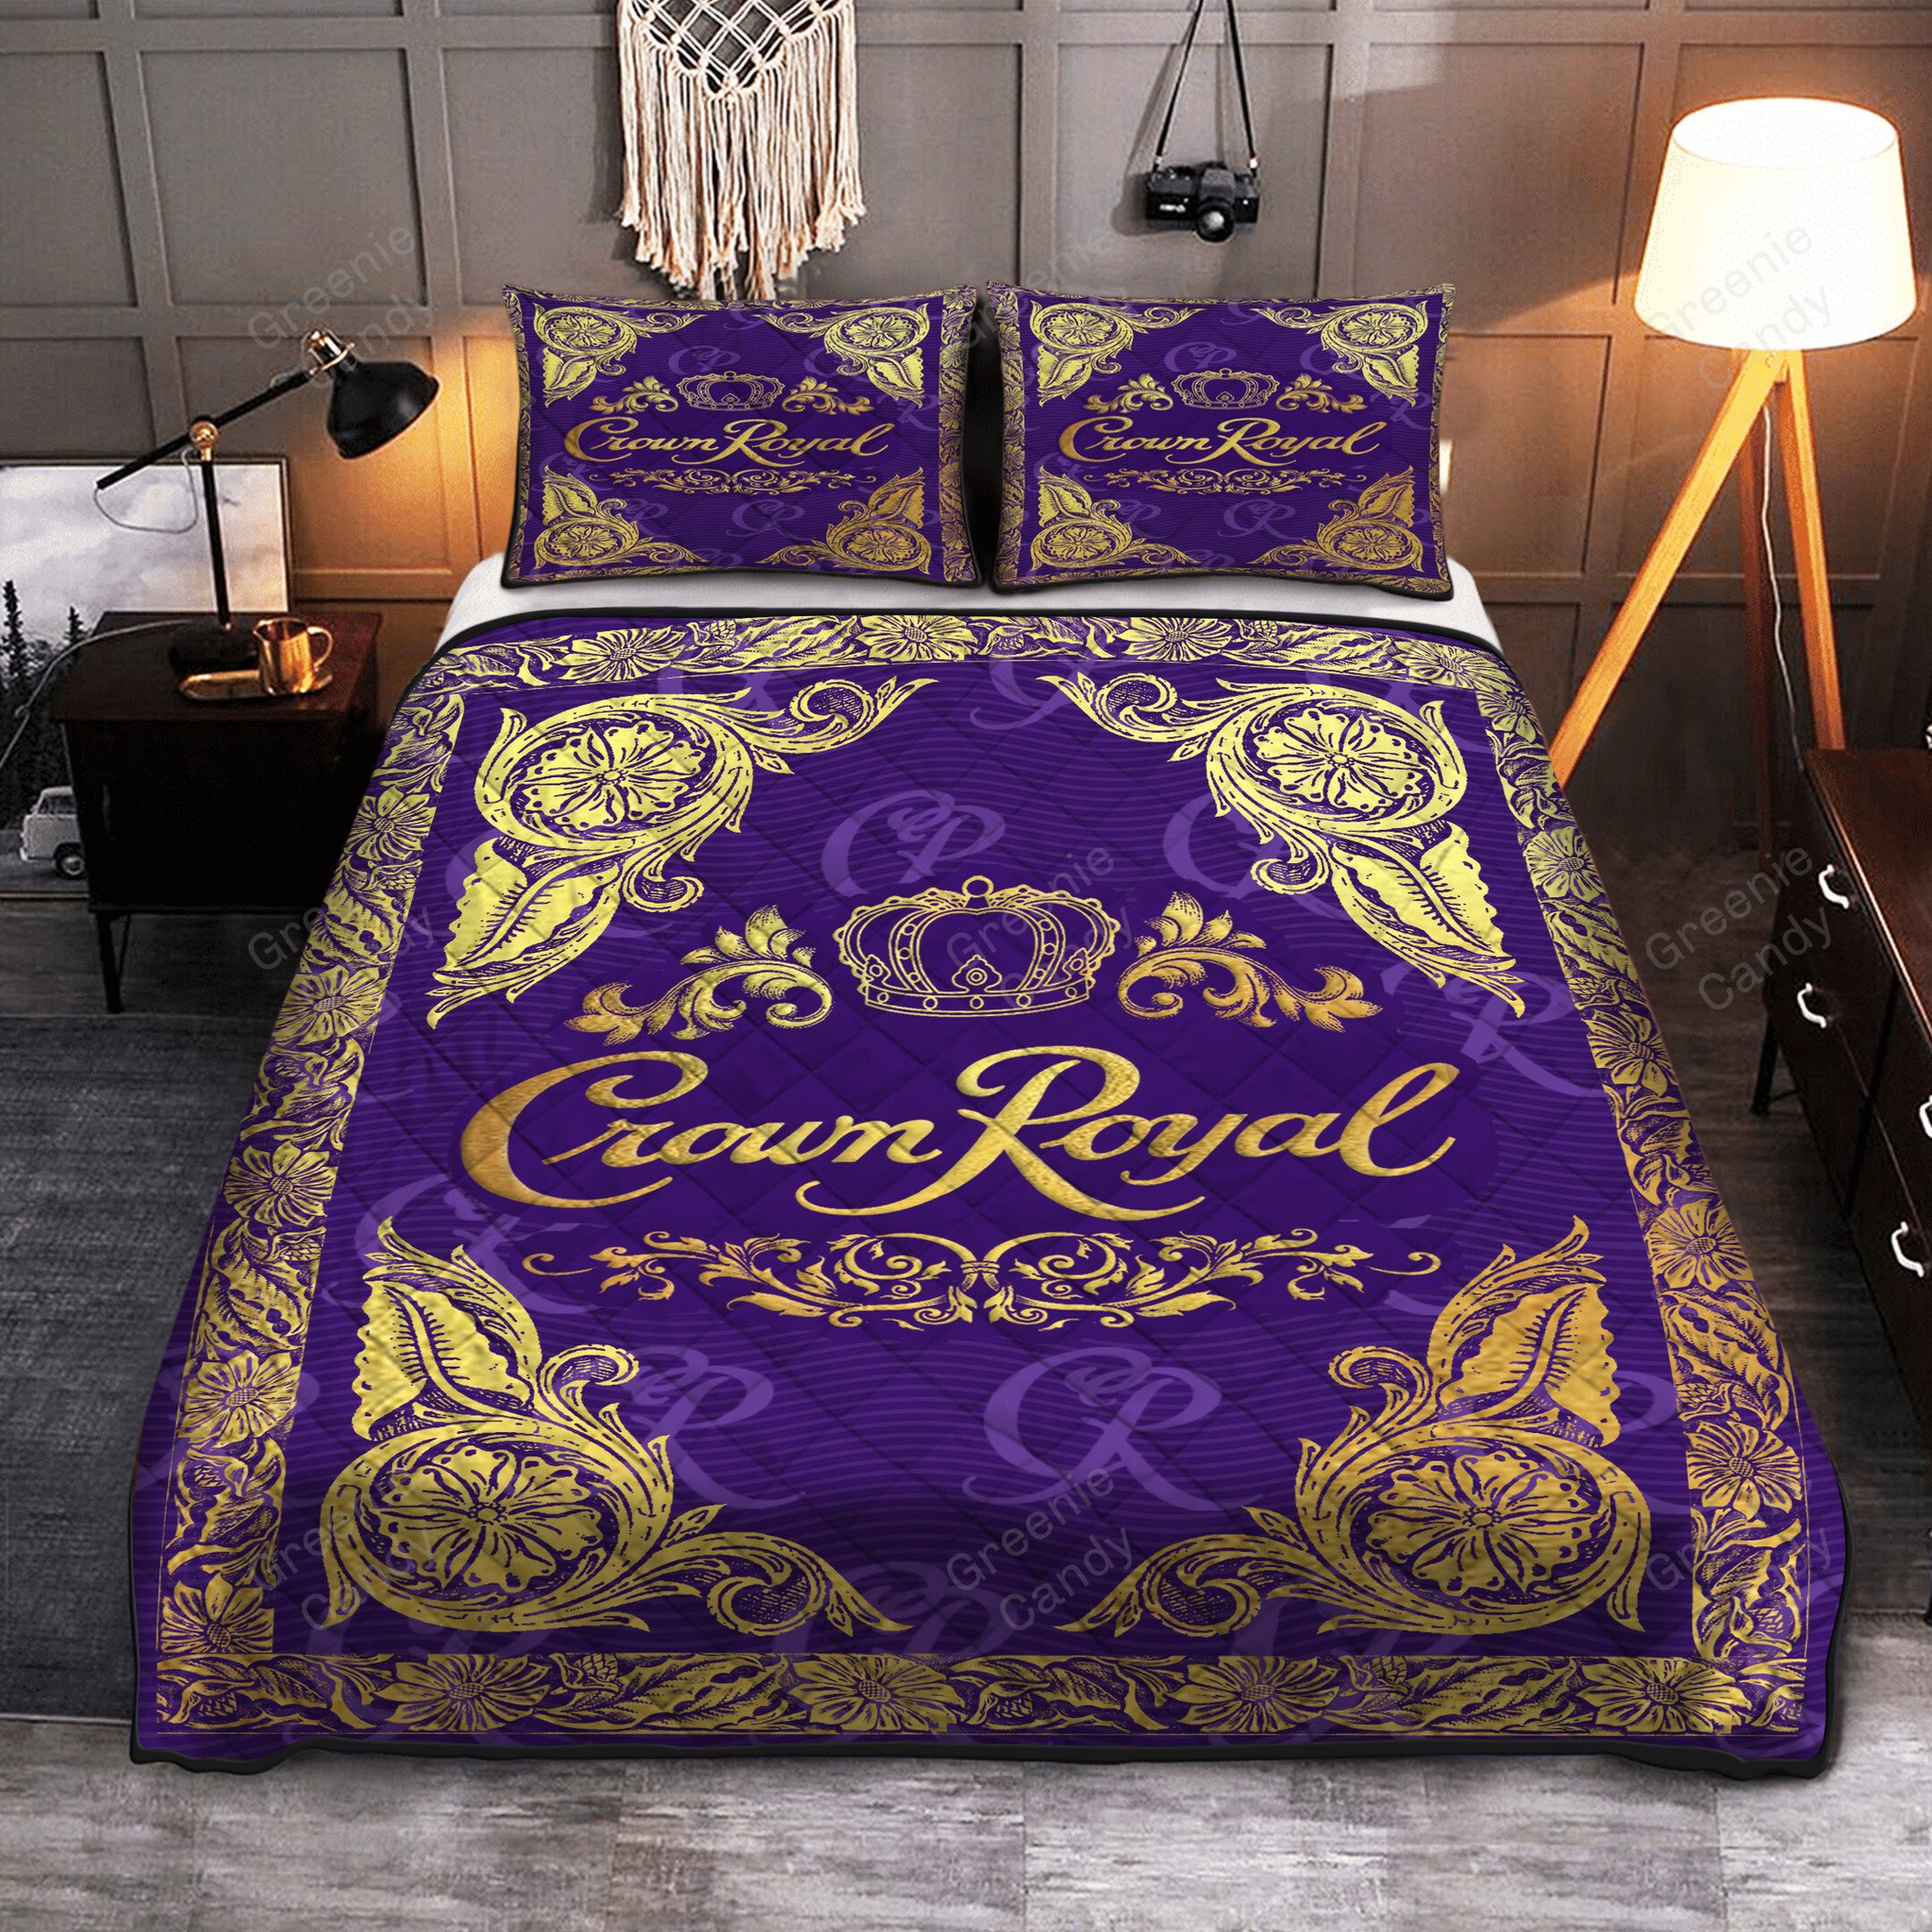 NEW Crown Royal Deluxe Whiskey Bedding Set 11